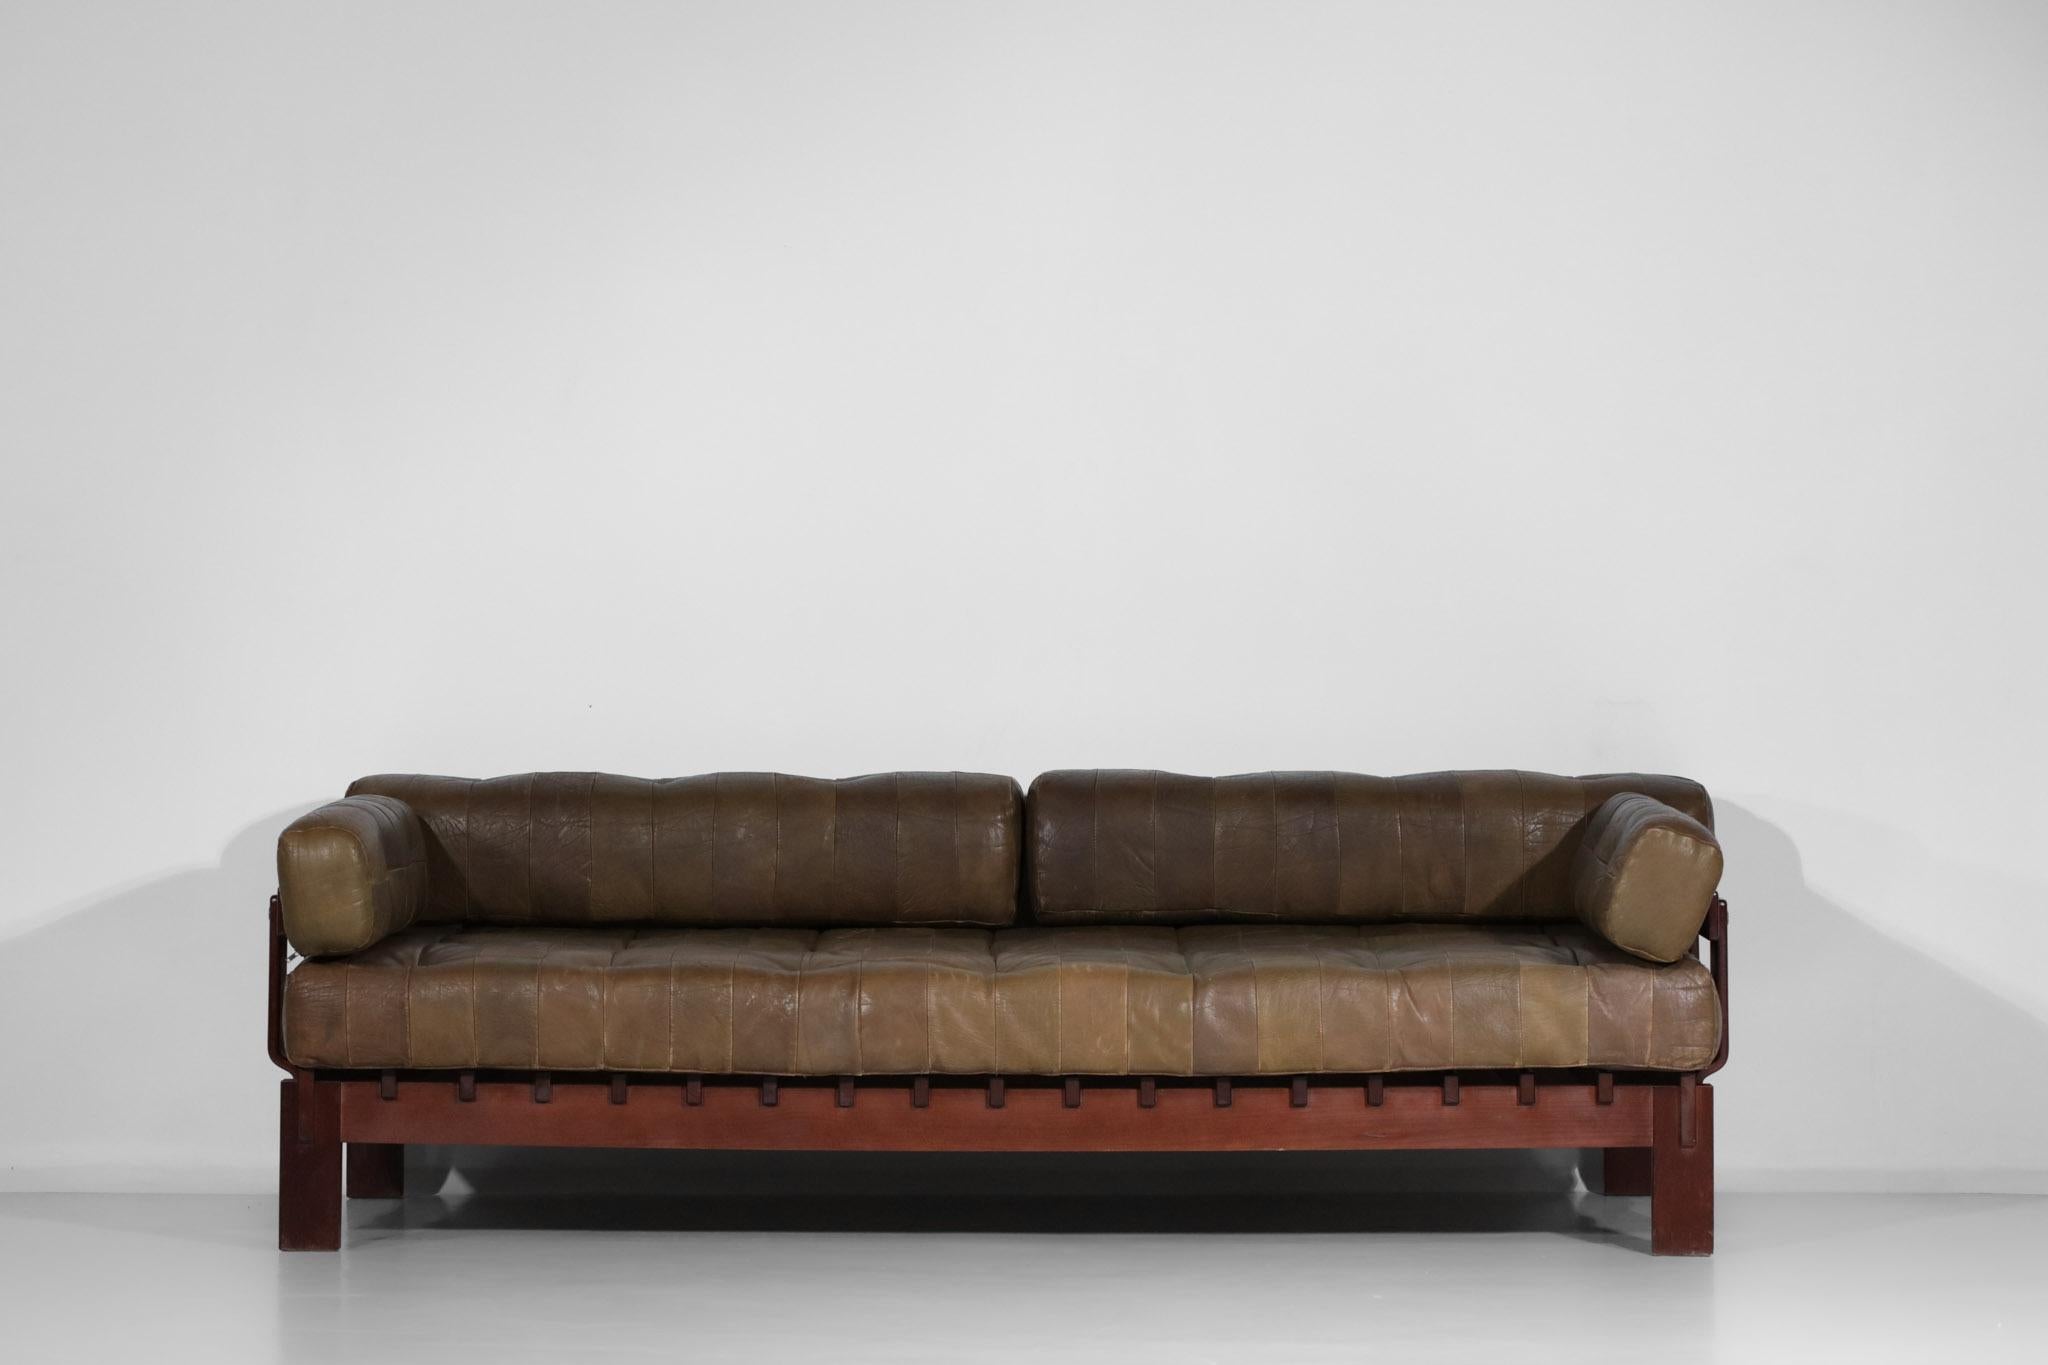 Very nice sofa from the 60's in the De Sede style. Seat, back and armrests in original brown leather patchwork, these are removable. Structure of the sofa in solid wood, stained beech. Very nice patina, traces of wear on the seats which have been